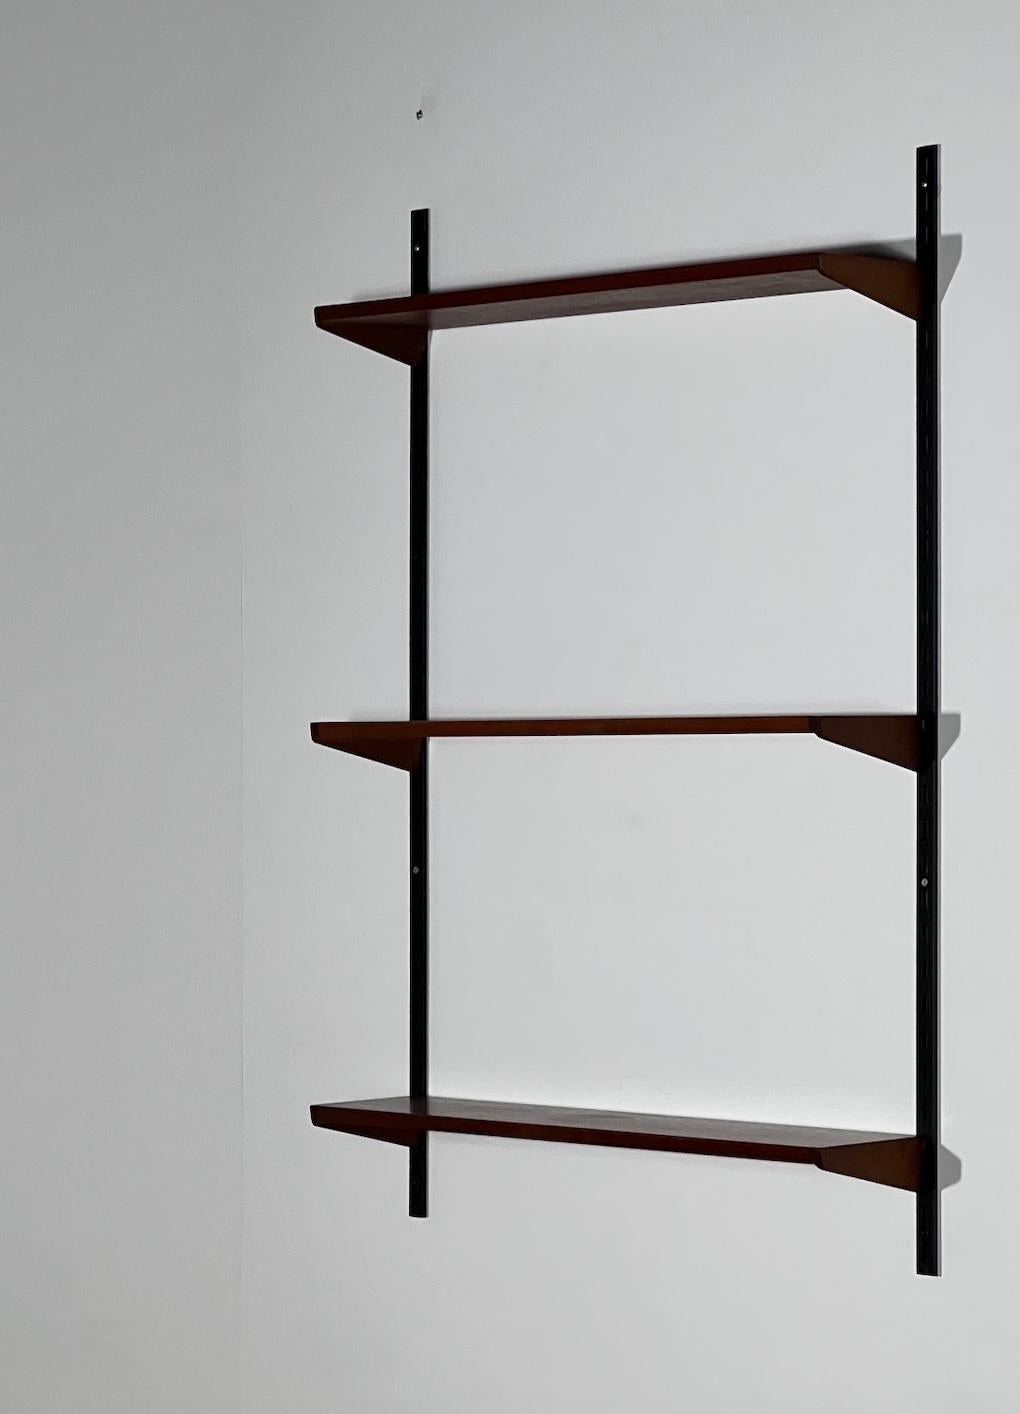 These shelves were designed by kai kristiansen for the Danish publisher feldalles møbler in the 1960s. This designer is a major figure. Scandinavian design of the 20th century. He is known for his modular shelving. The structure of these shelves is